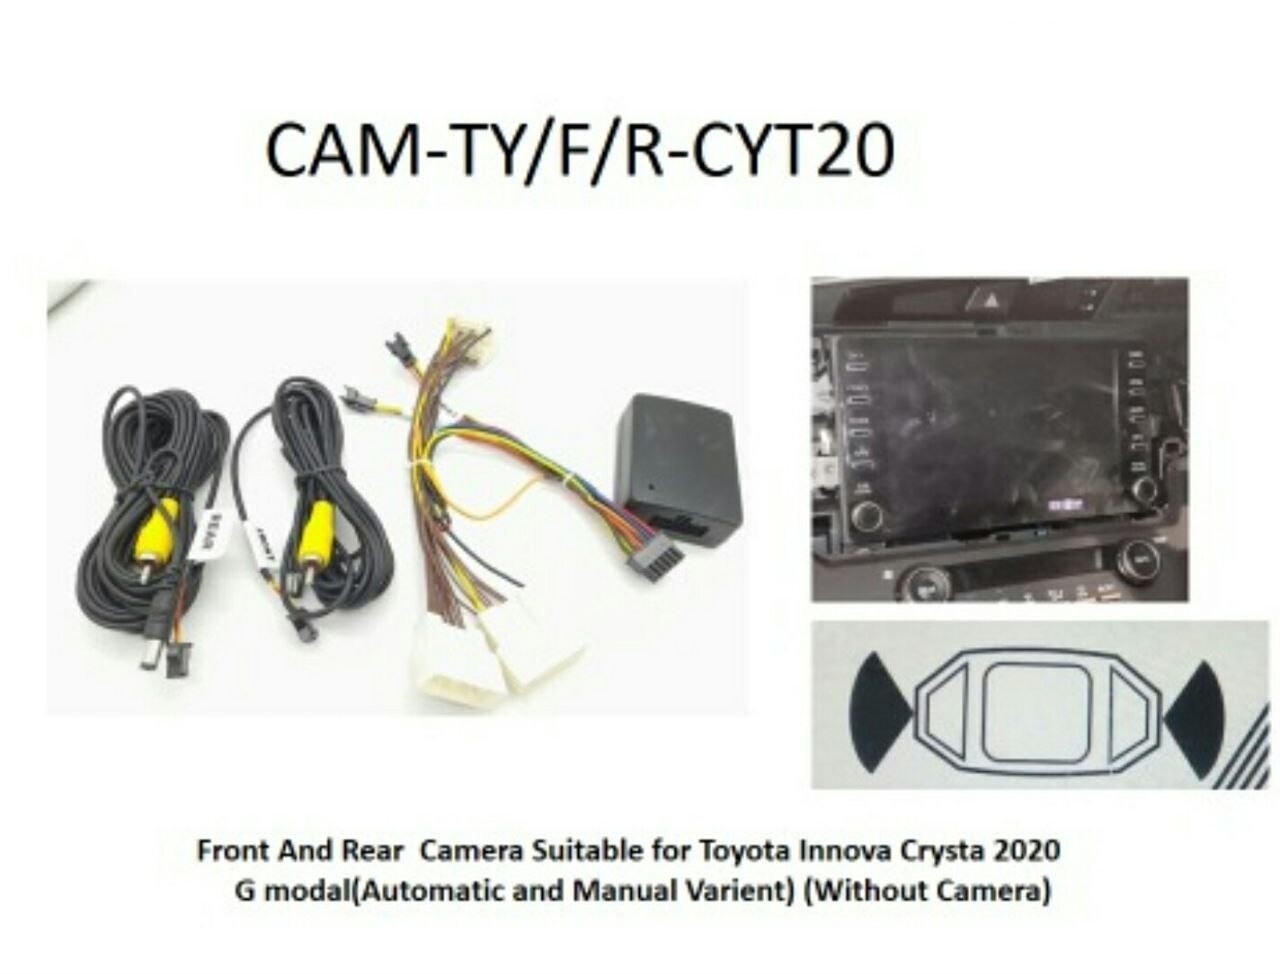 Front Camera with Front/Rear Interface for Toyota Innova Crysta